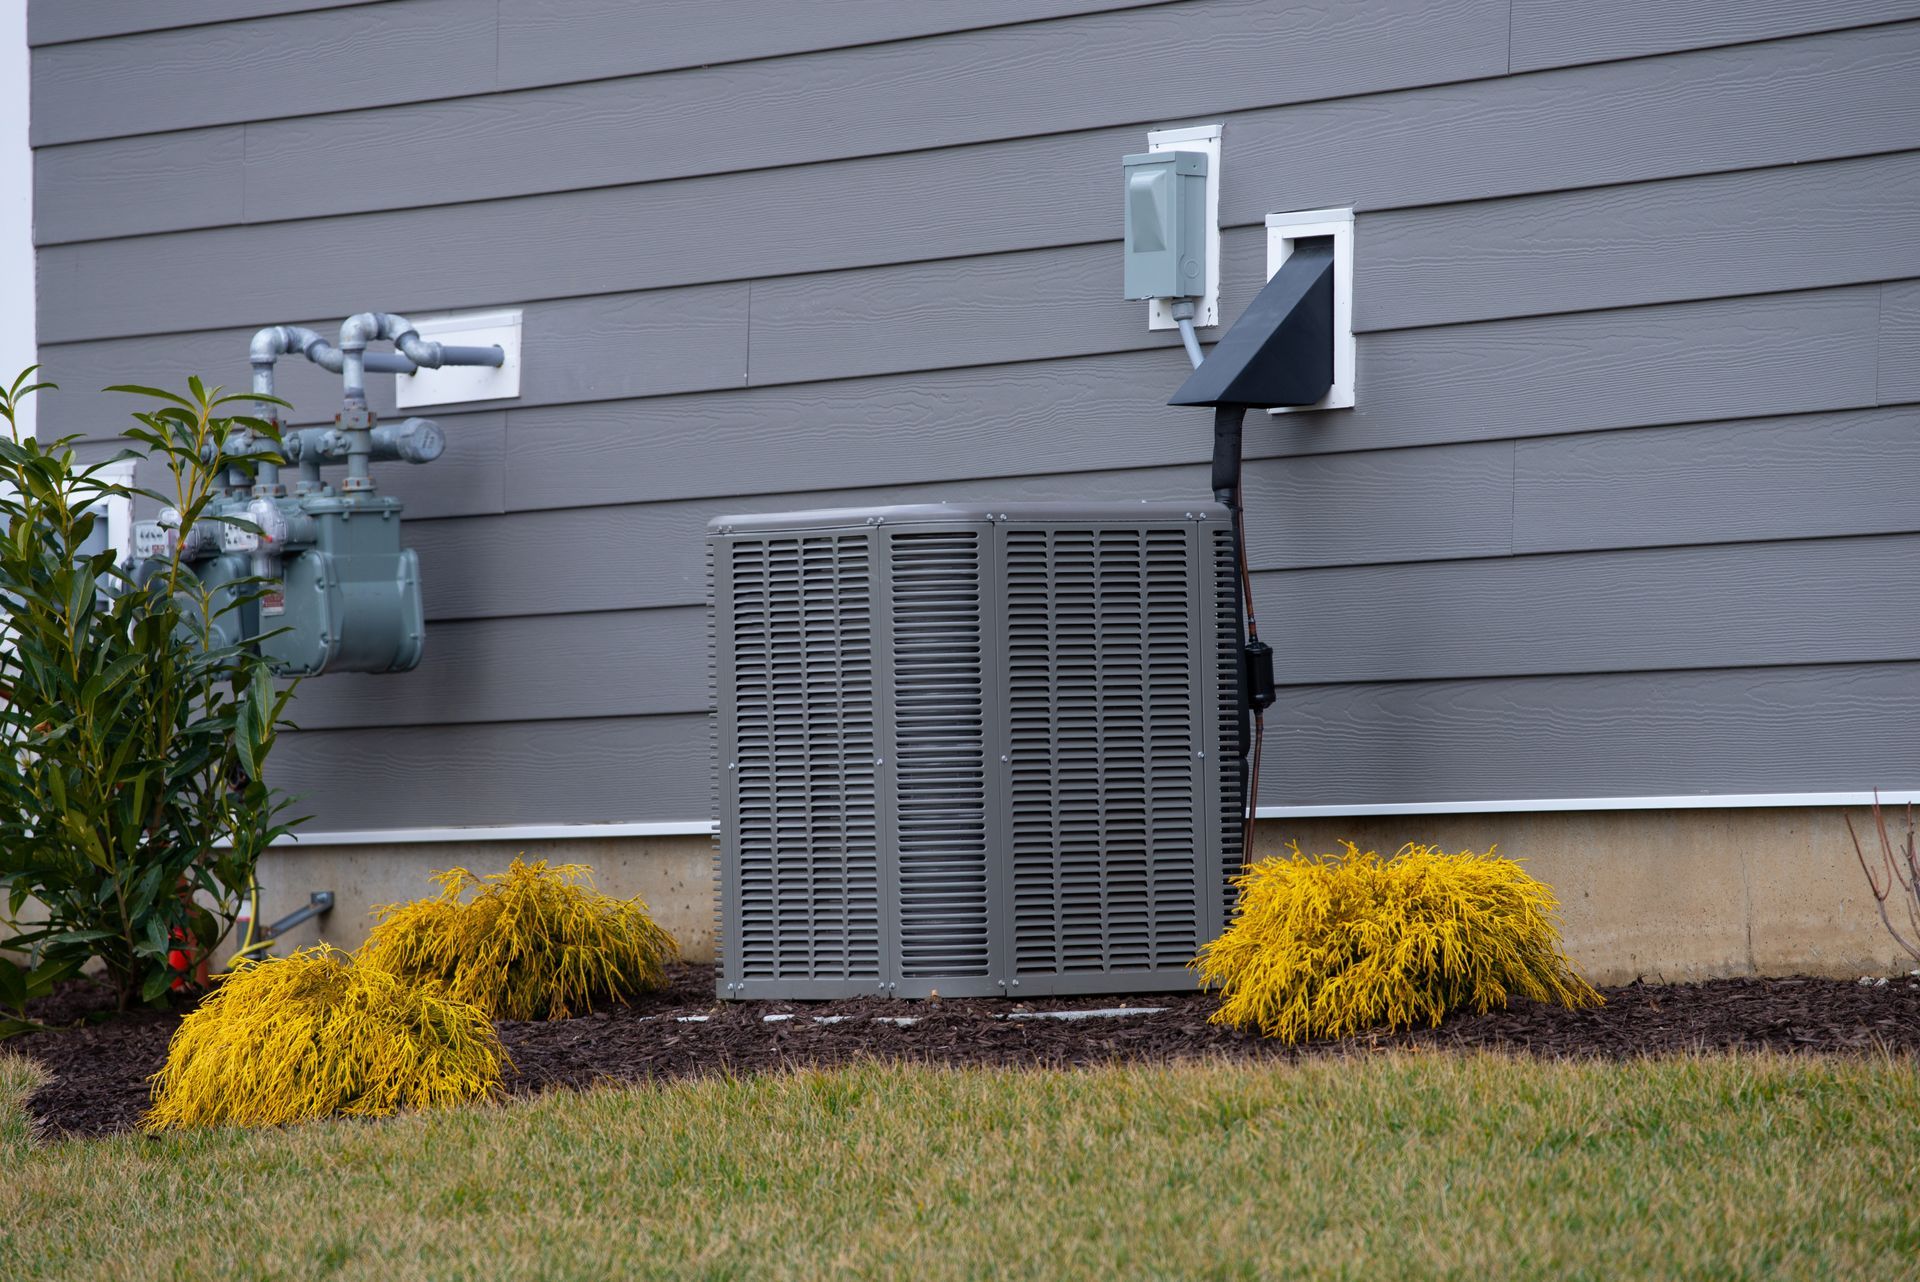 An air conditioner is sitting on the side of a house.